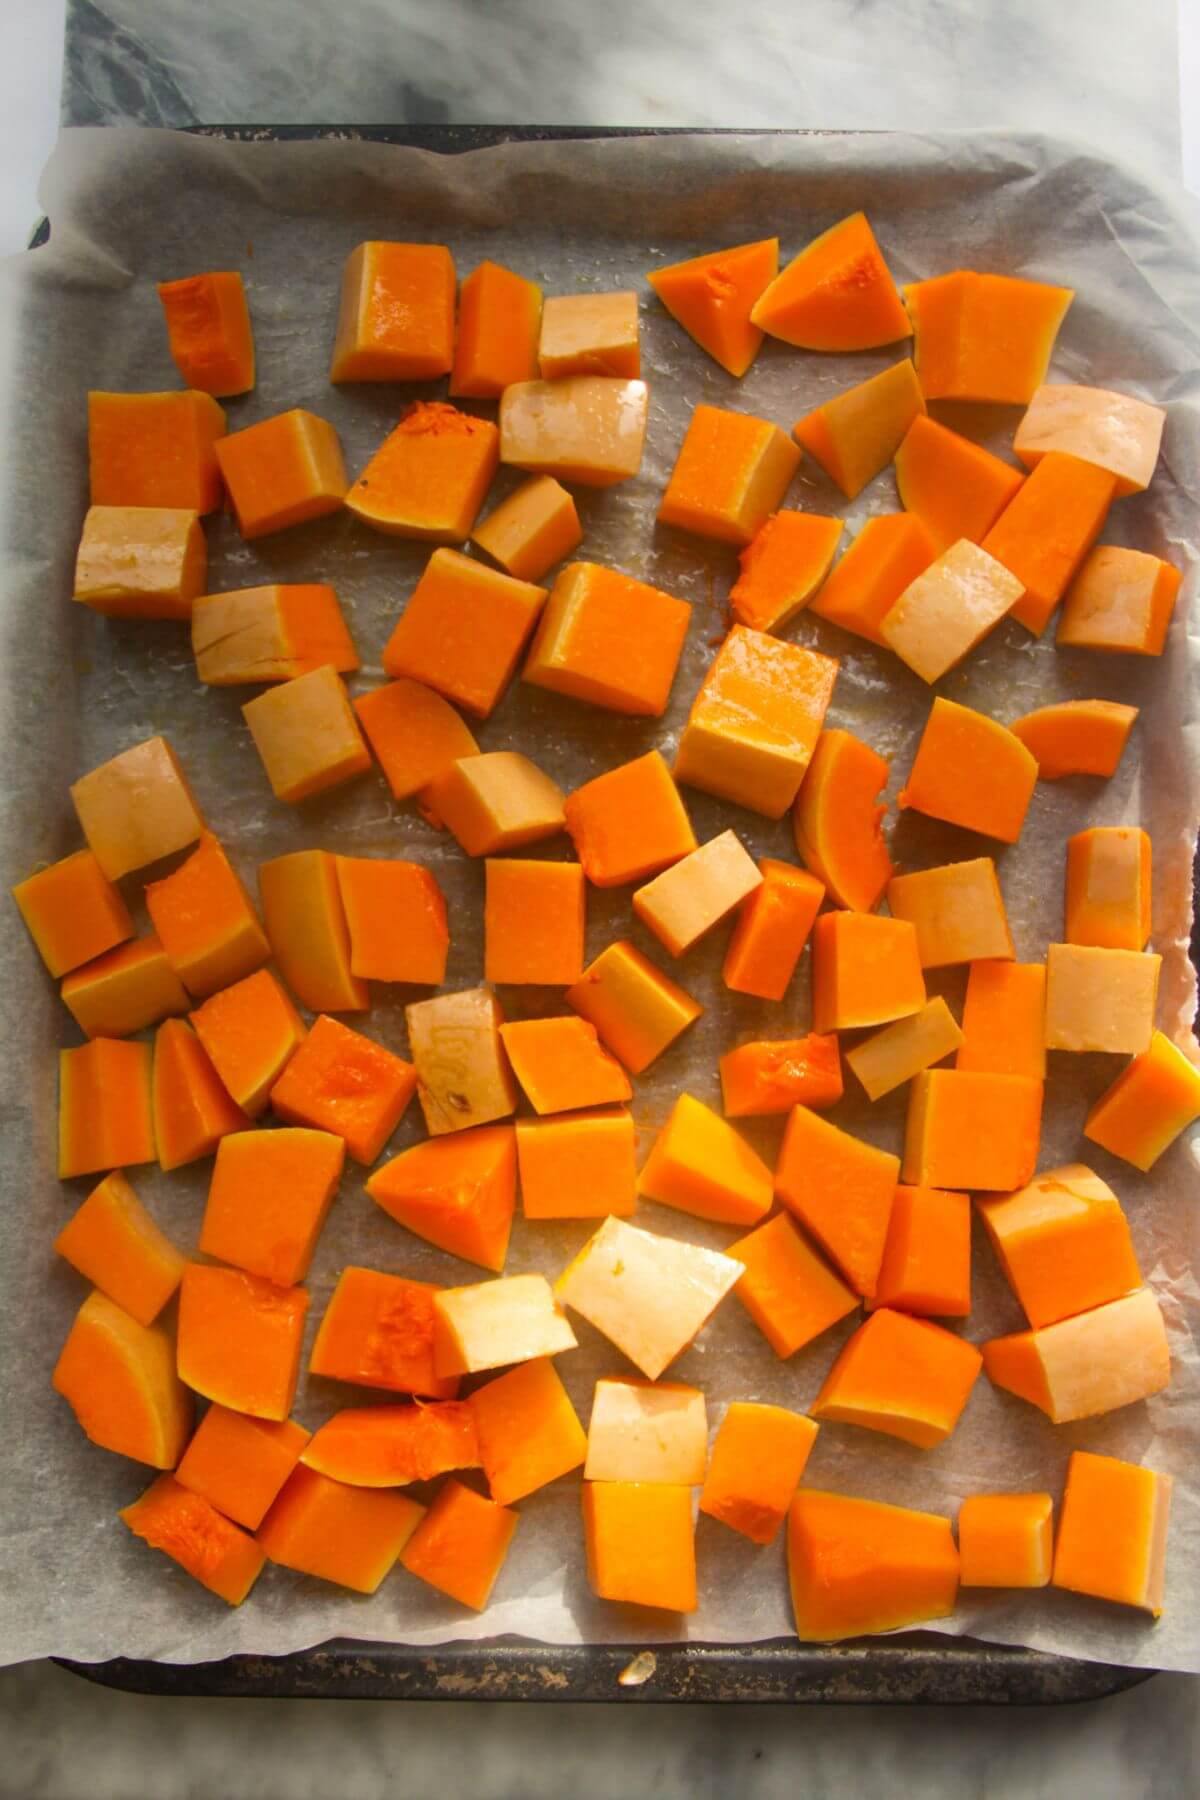 Butternut squash cubes on a lined oven tray.